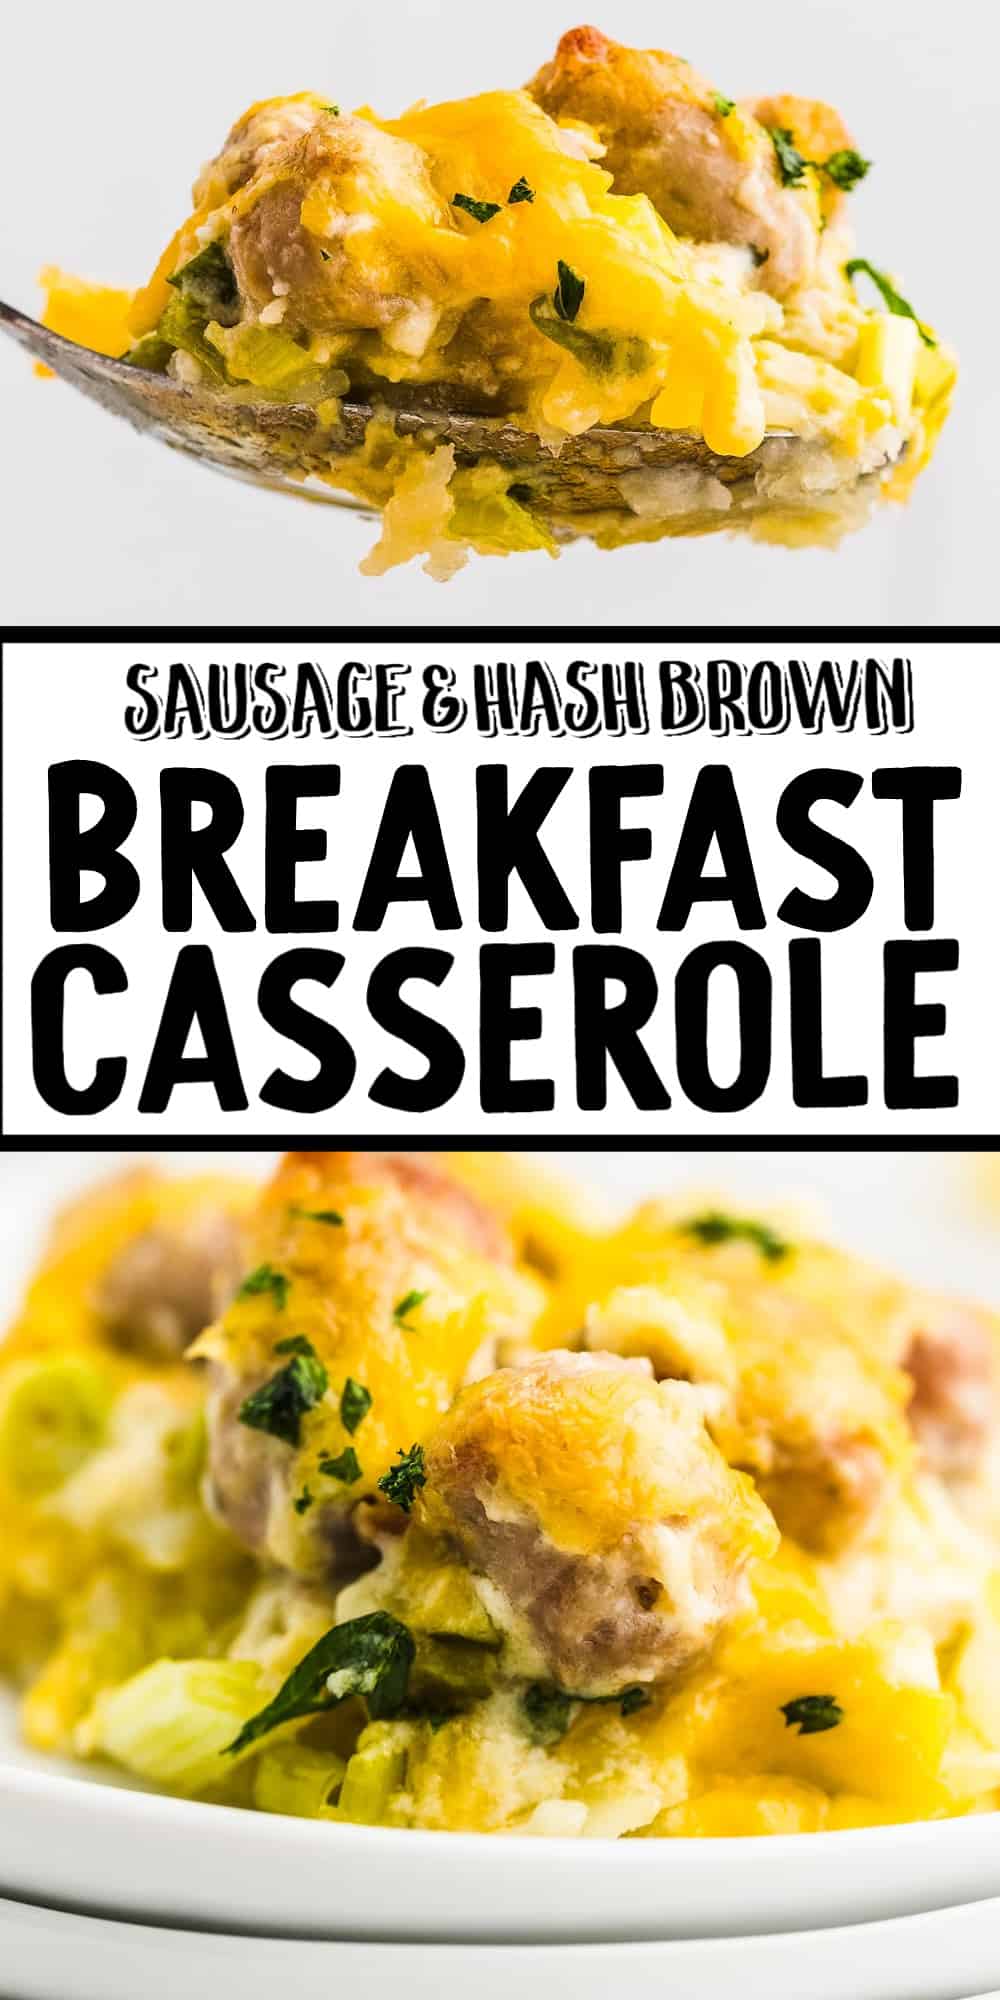 Sausage Hash Brown Casserole combines the biggest breakfast flavors into a delicious and easy to make breakfast dish. #cheerfulcook #breakfastcasserole #hashbrowncasserole #easycasserole via @cheerfulcook